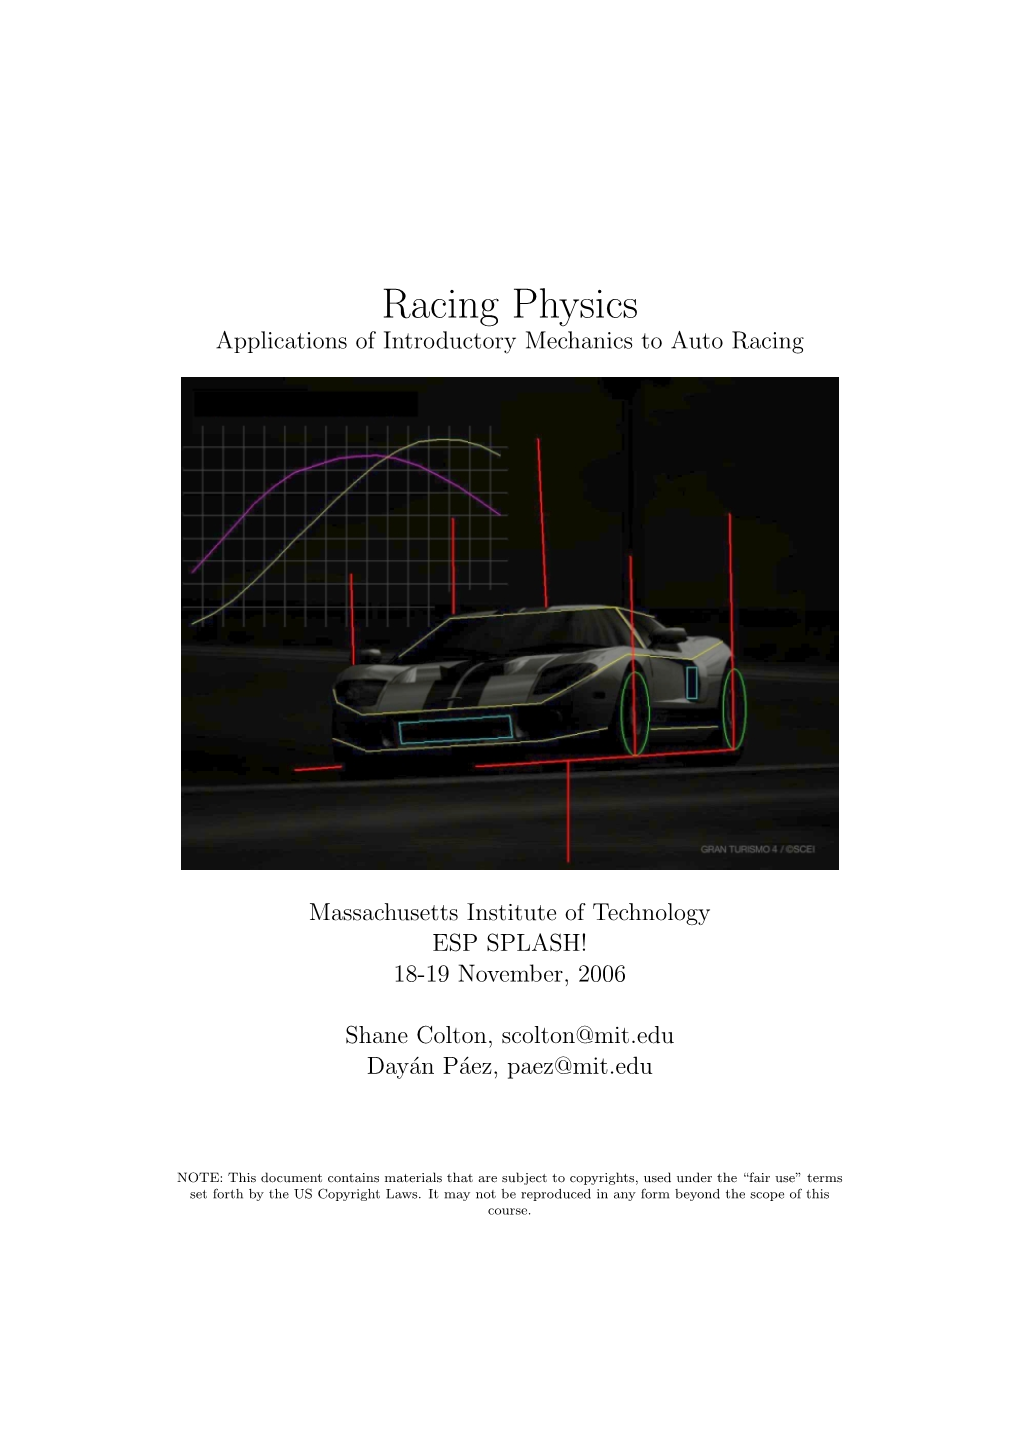 Racing Physics Applications of Introductory Mechanics to Auto Racing